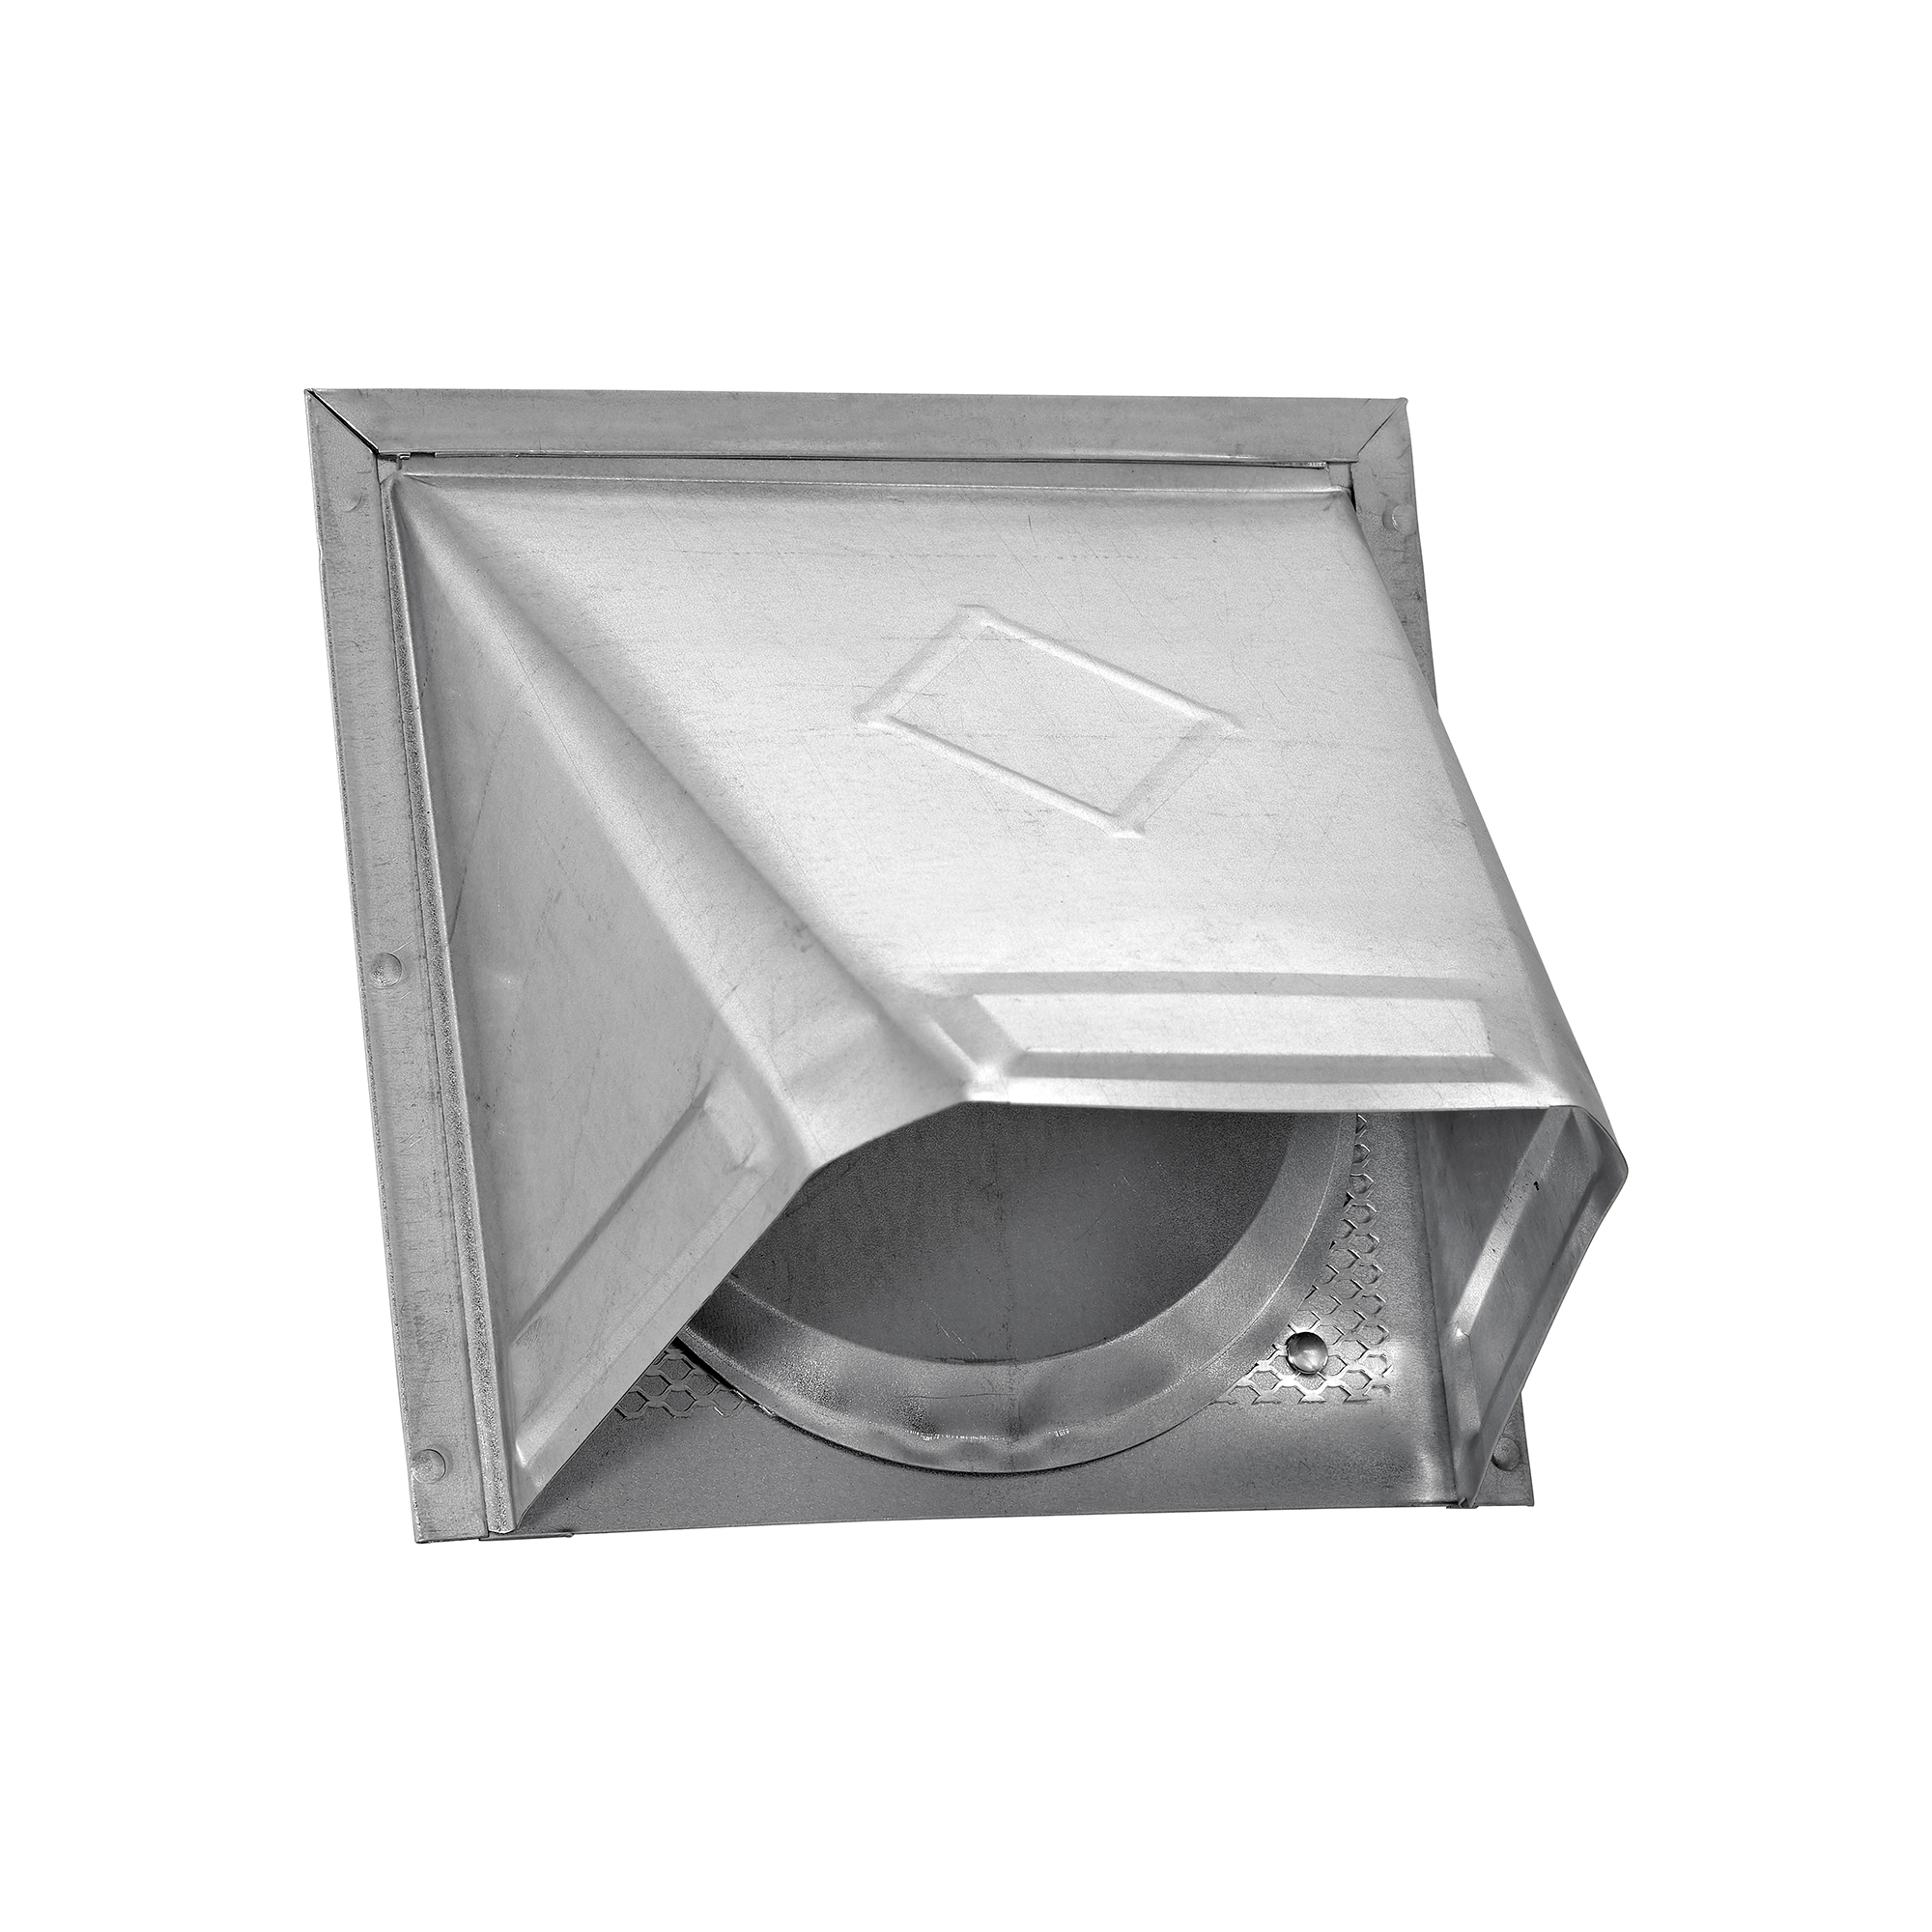 Galvanized Steel Wall Exhaust Hood Vent - Damper - Screen - Flush Mount - Front Closed